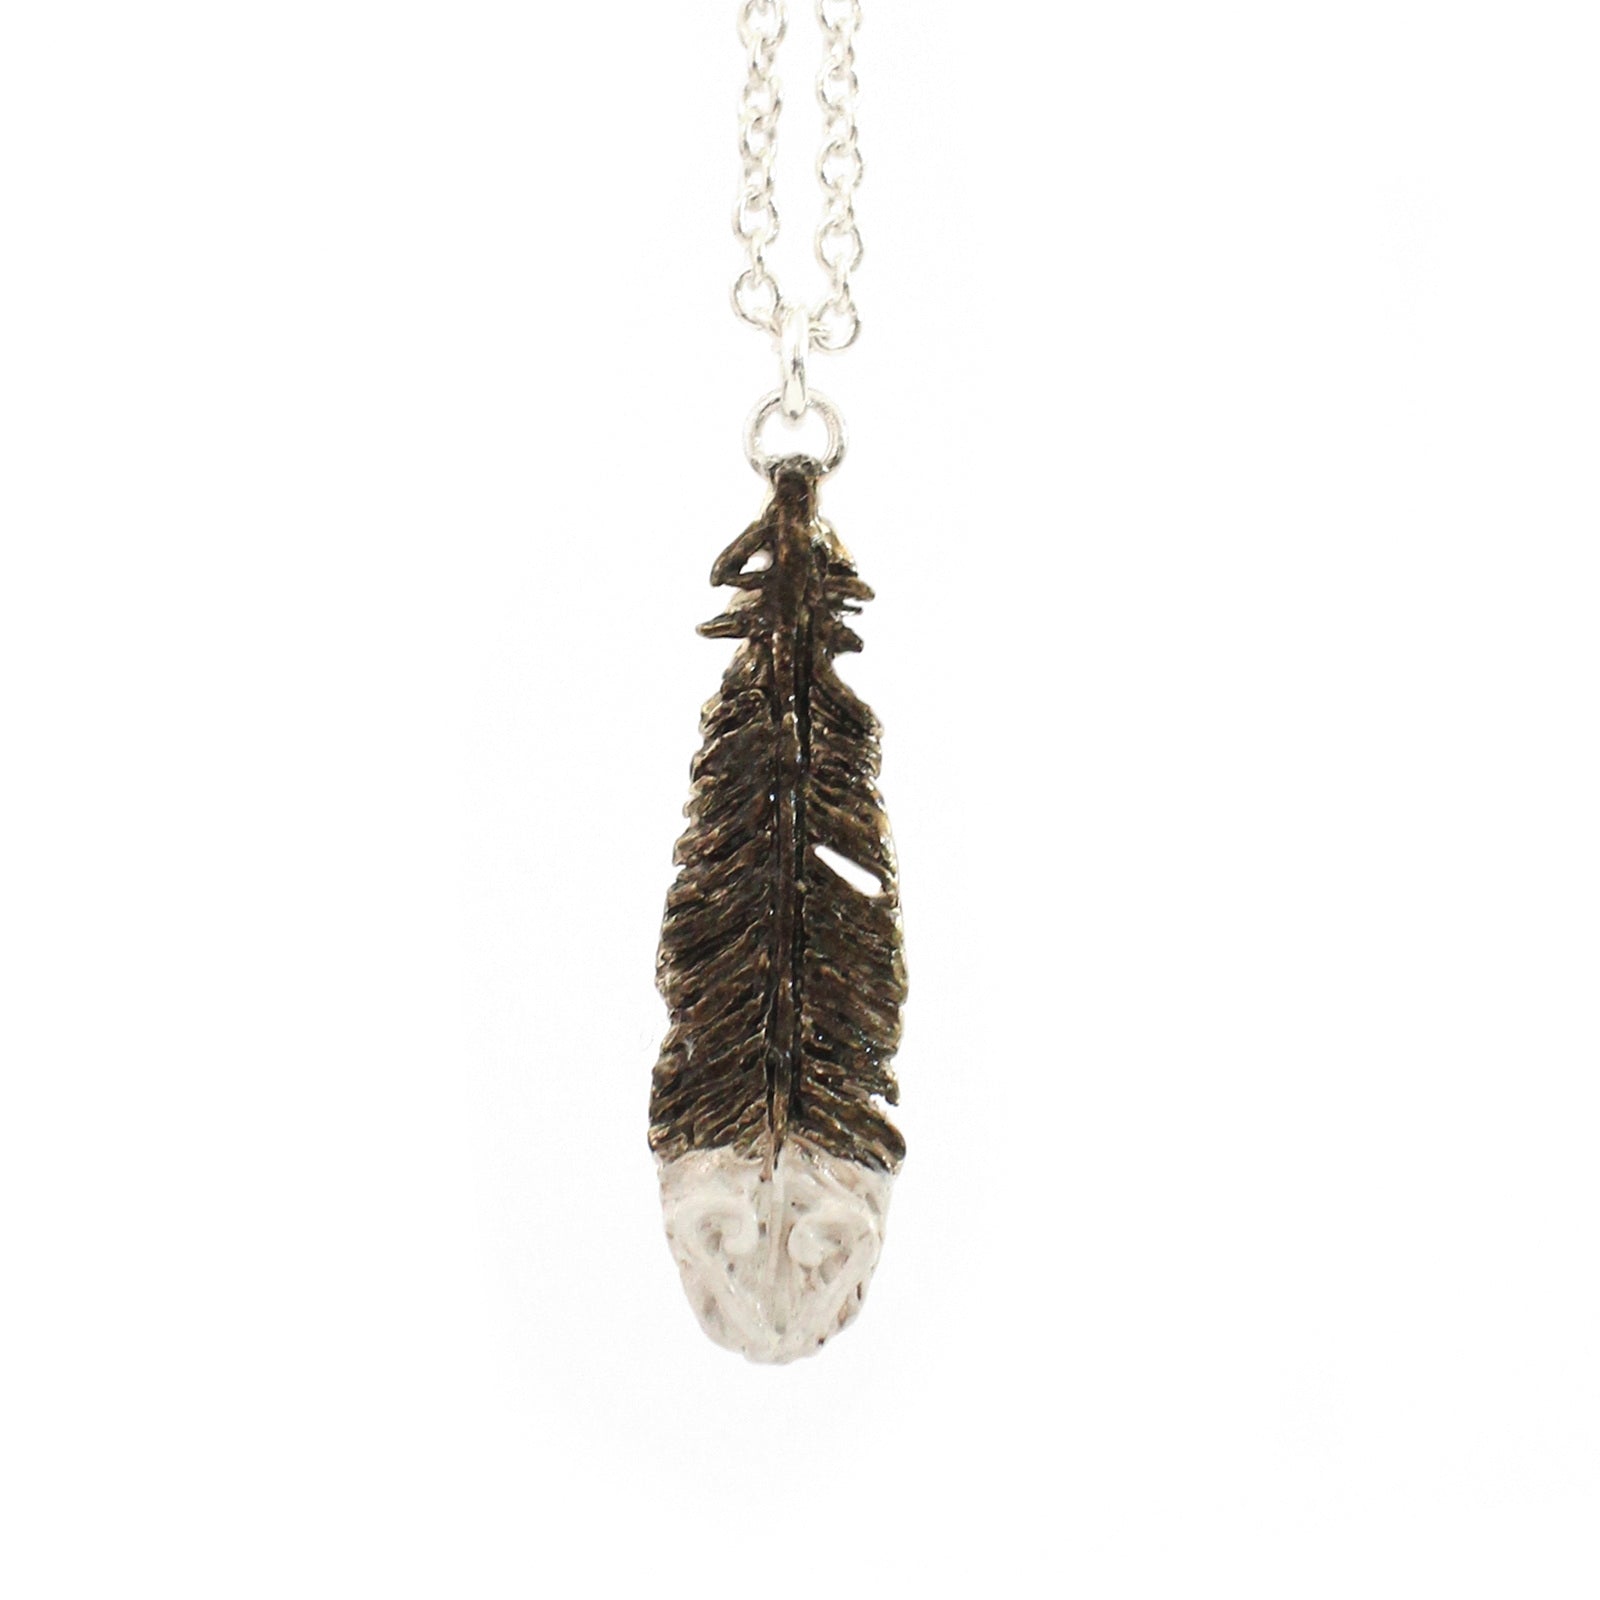 Huia Feather Necklace - Handpainted Silver